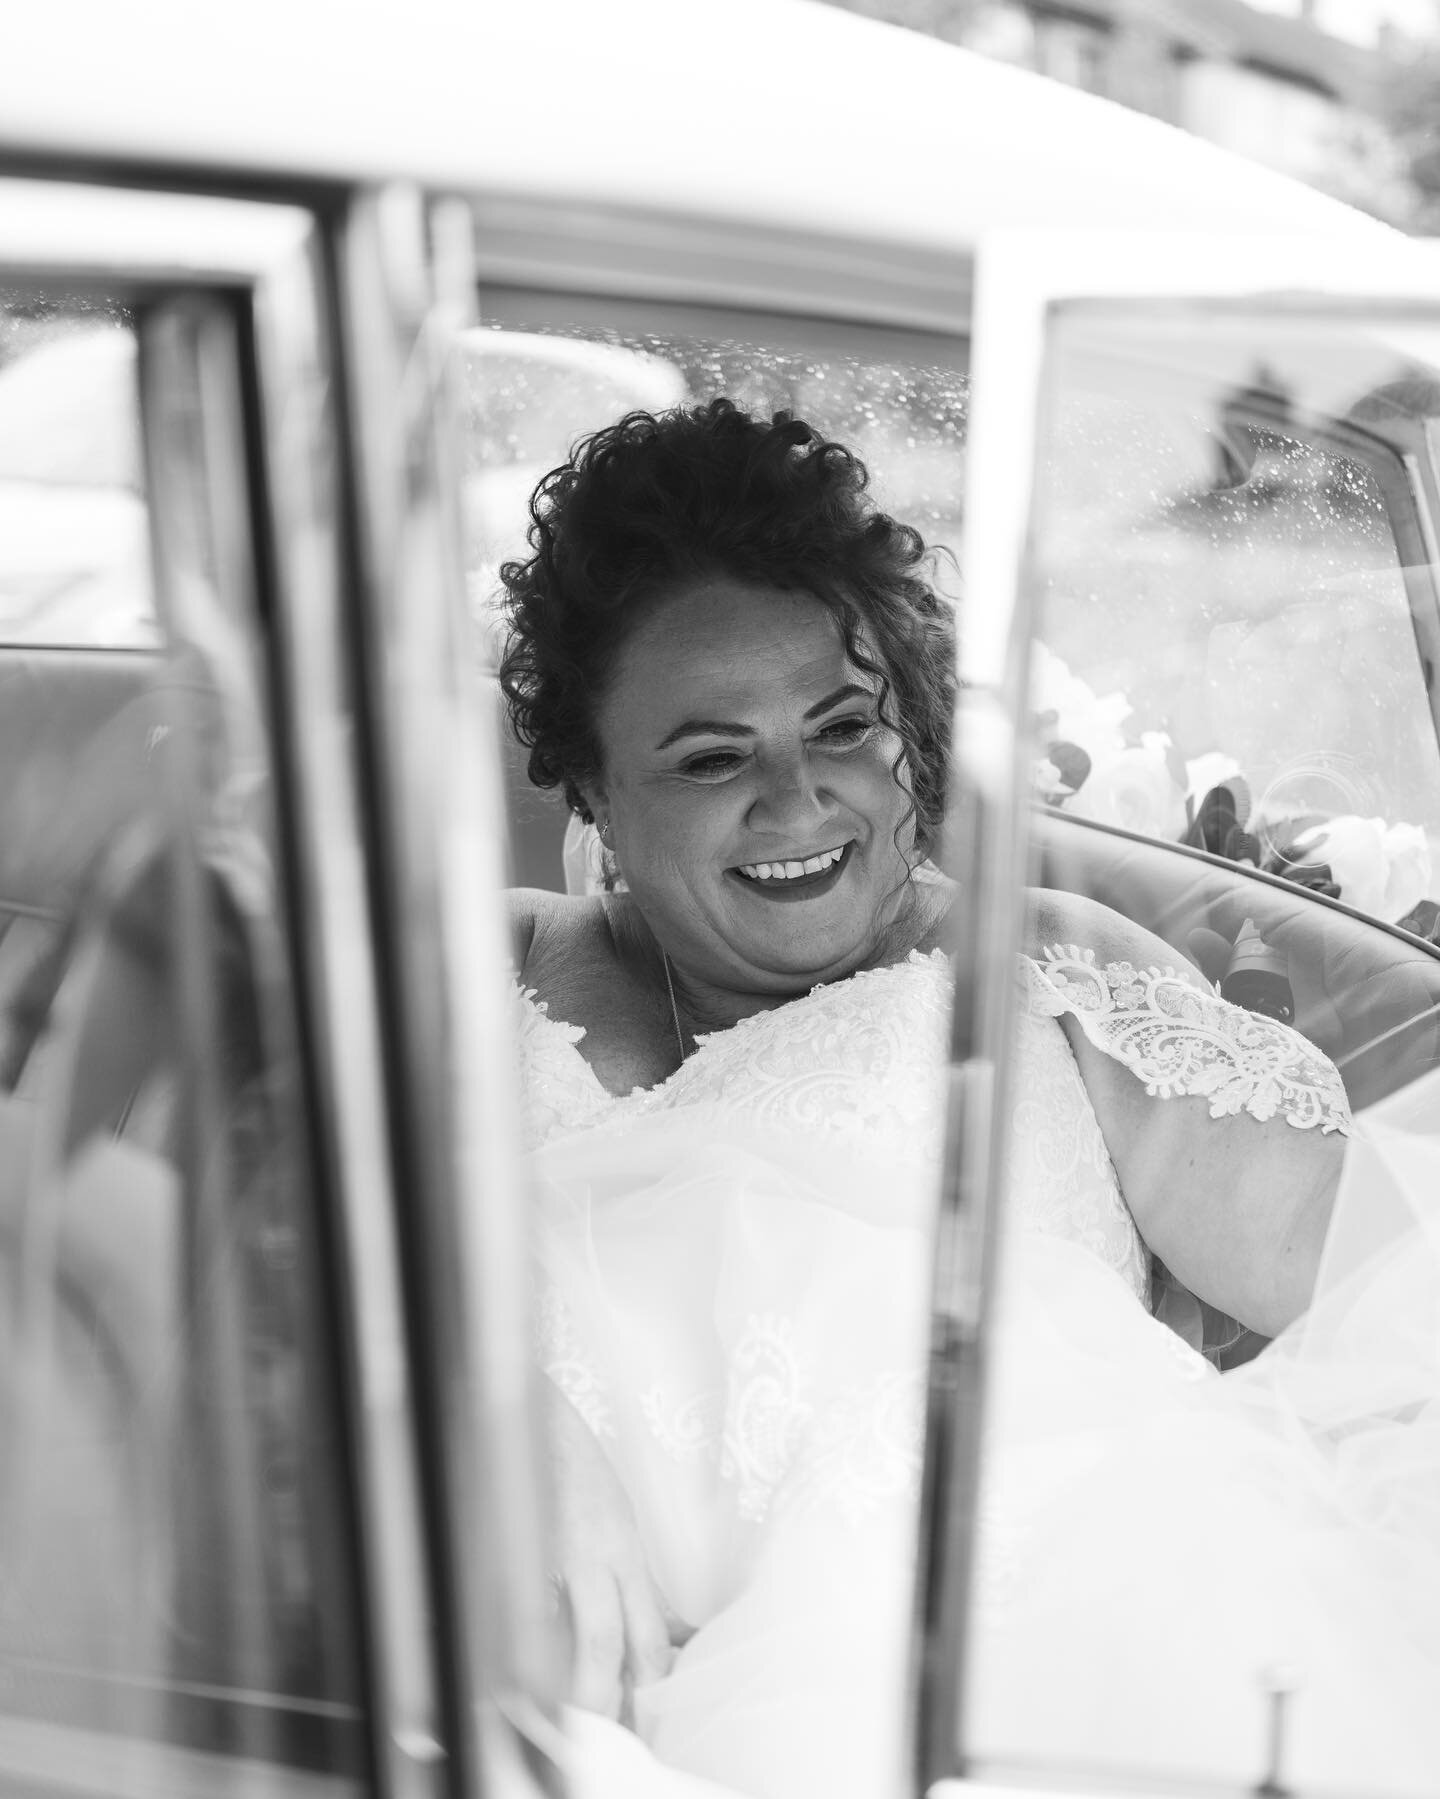 The beautiful Valerie 👰🏻&zwj;♀️🤍

Smiling because just out of shot is her best friend and maid of honour carefully folding the dress into the back of the Roller so she can get to the church in time! 💍